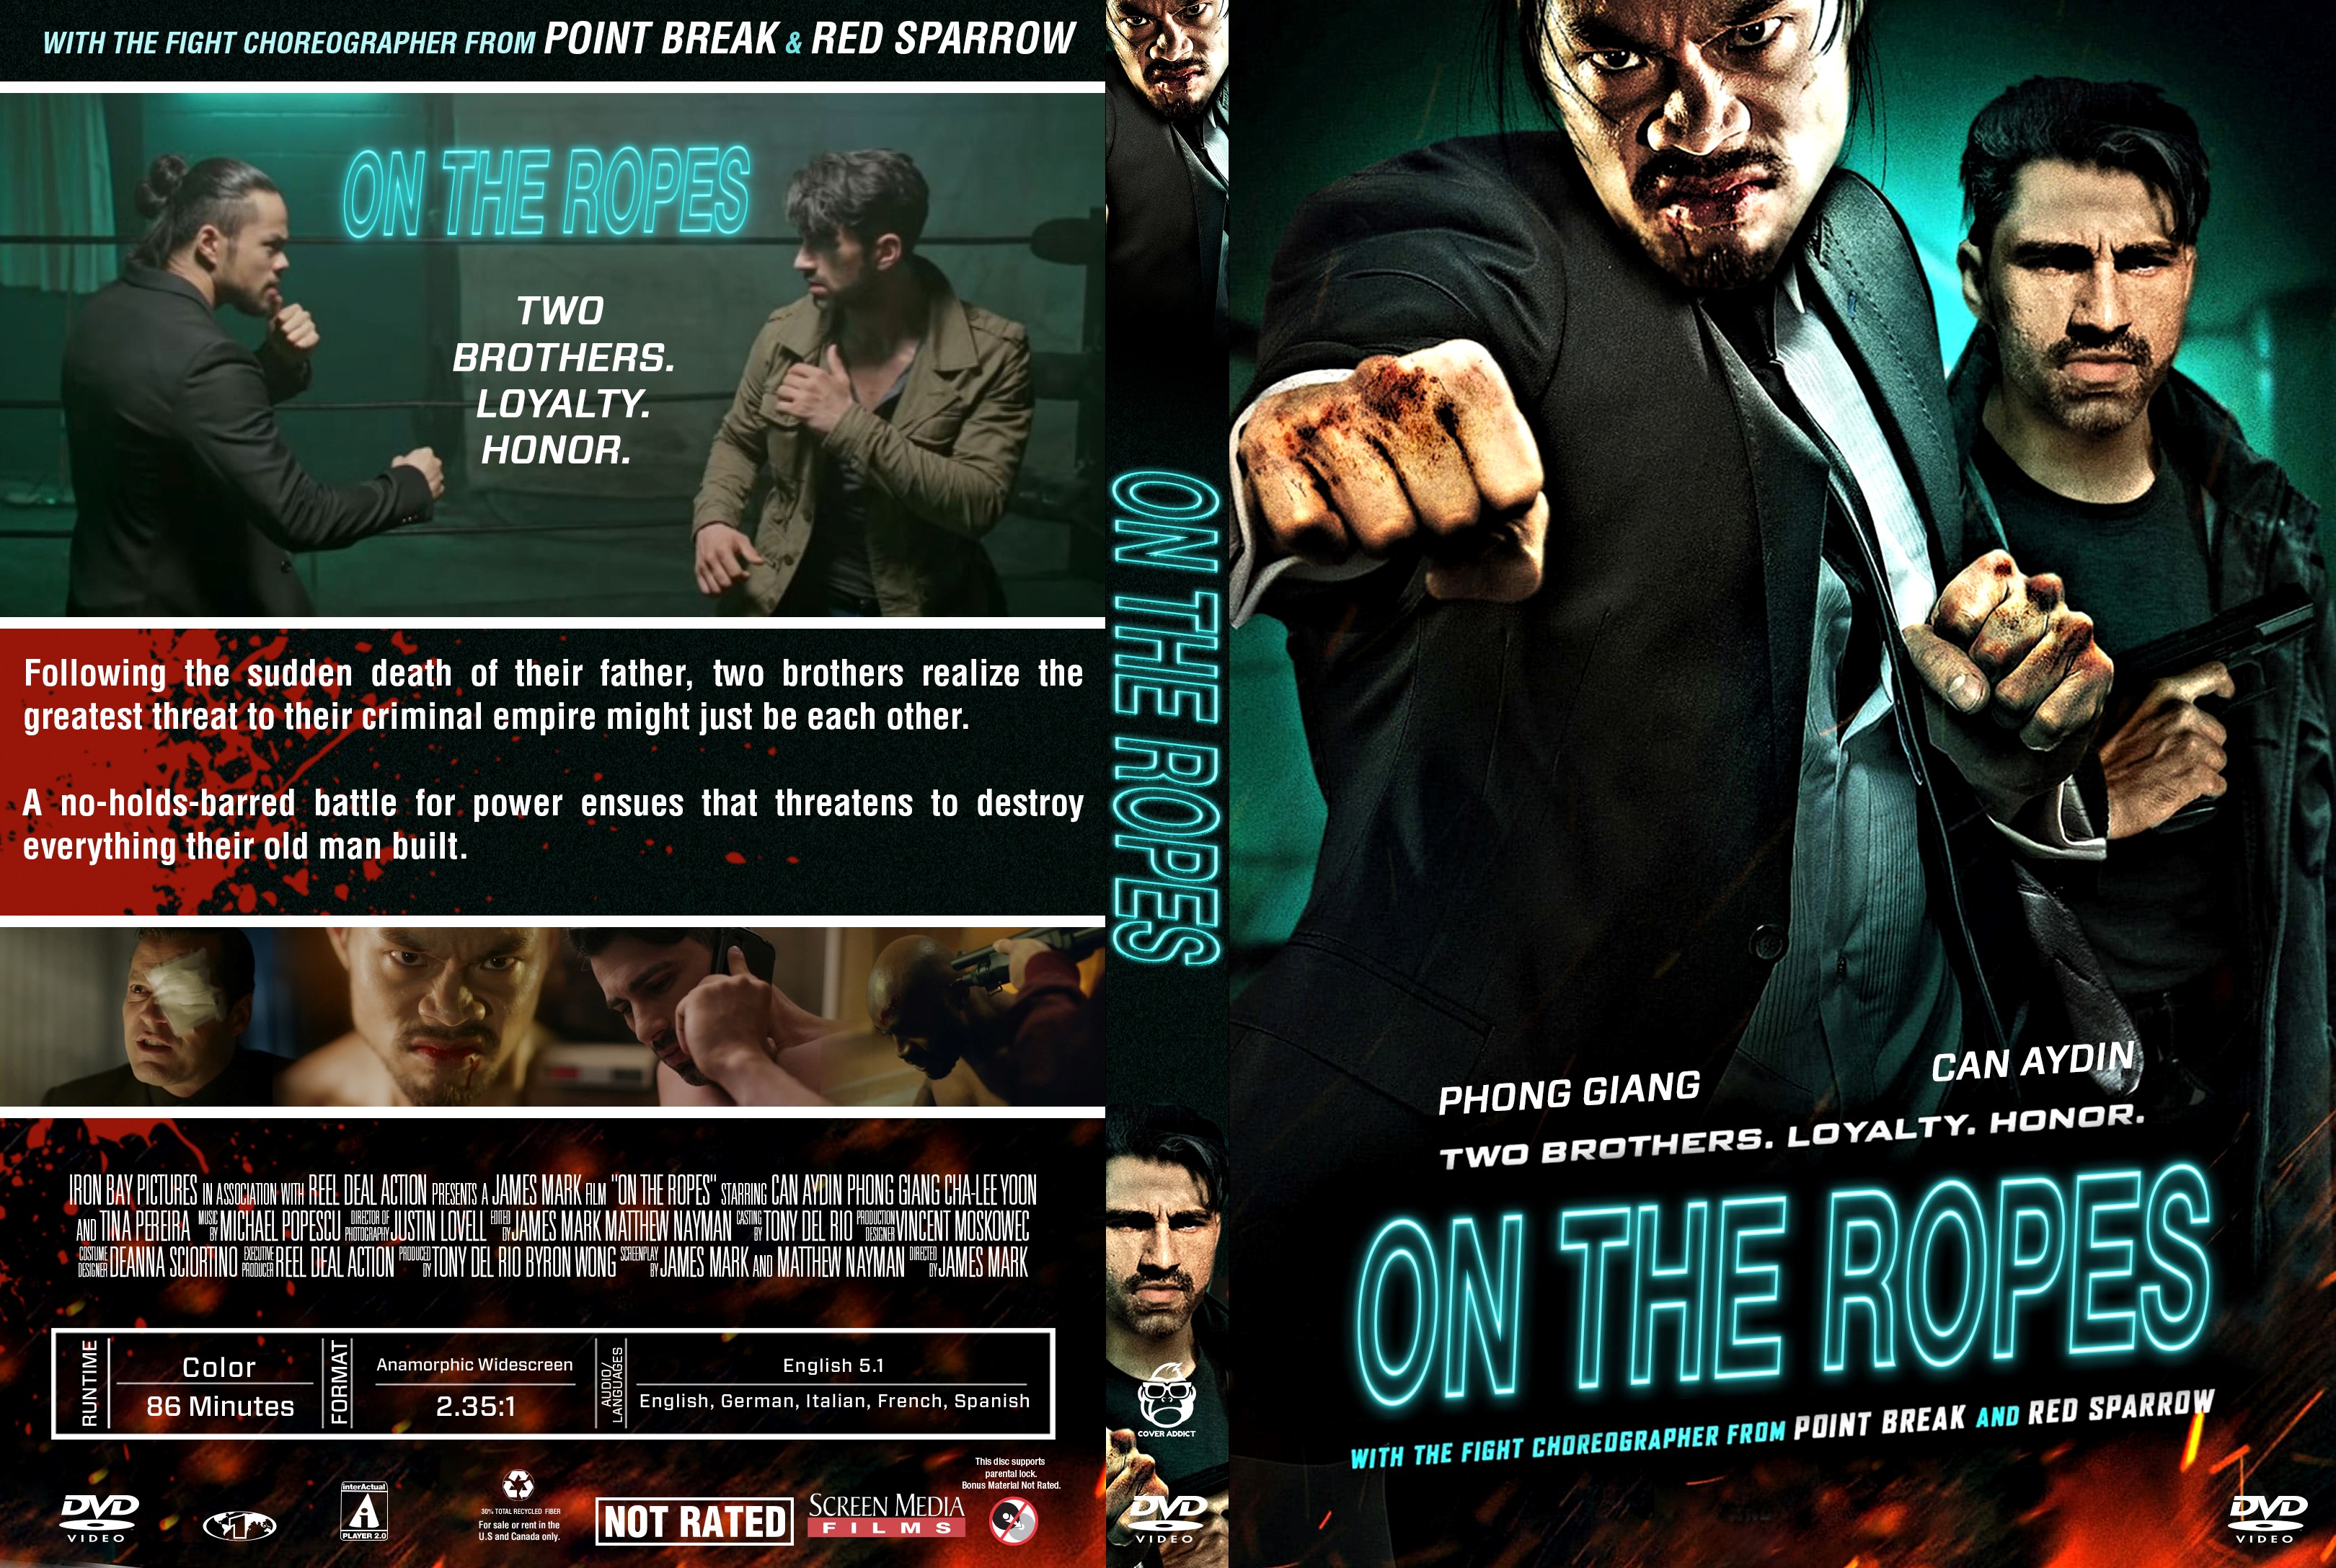 On The Ropes DVD Cover | Cover Addict - Free DVD, Bluray Covers and Movie Posters